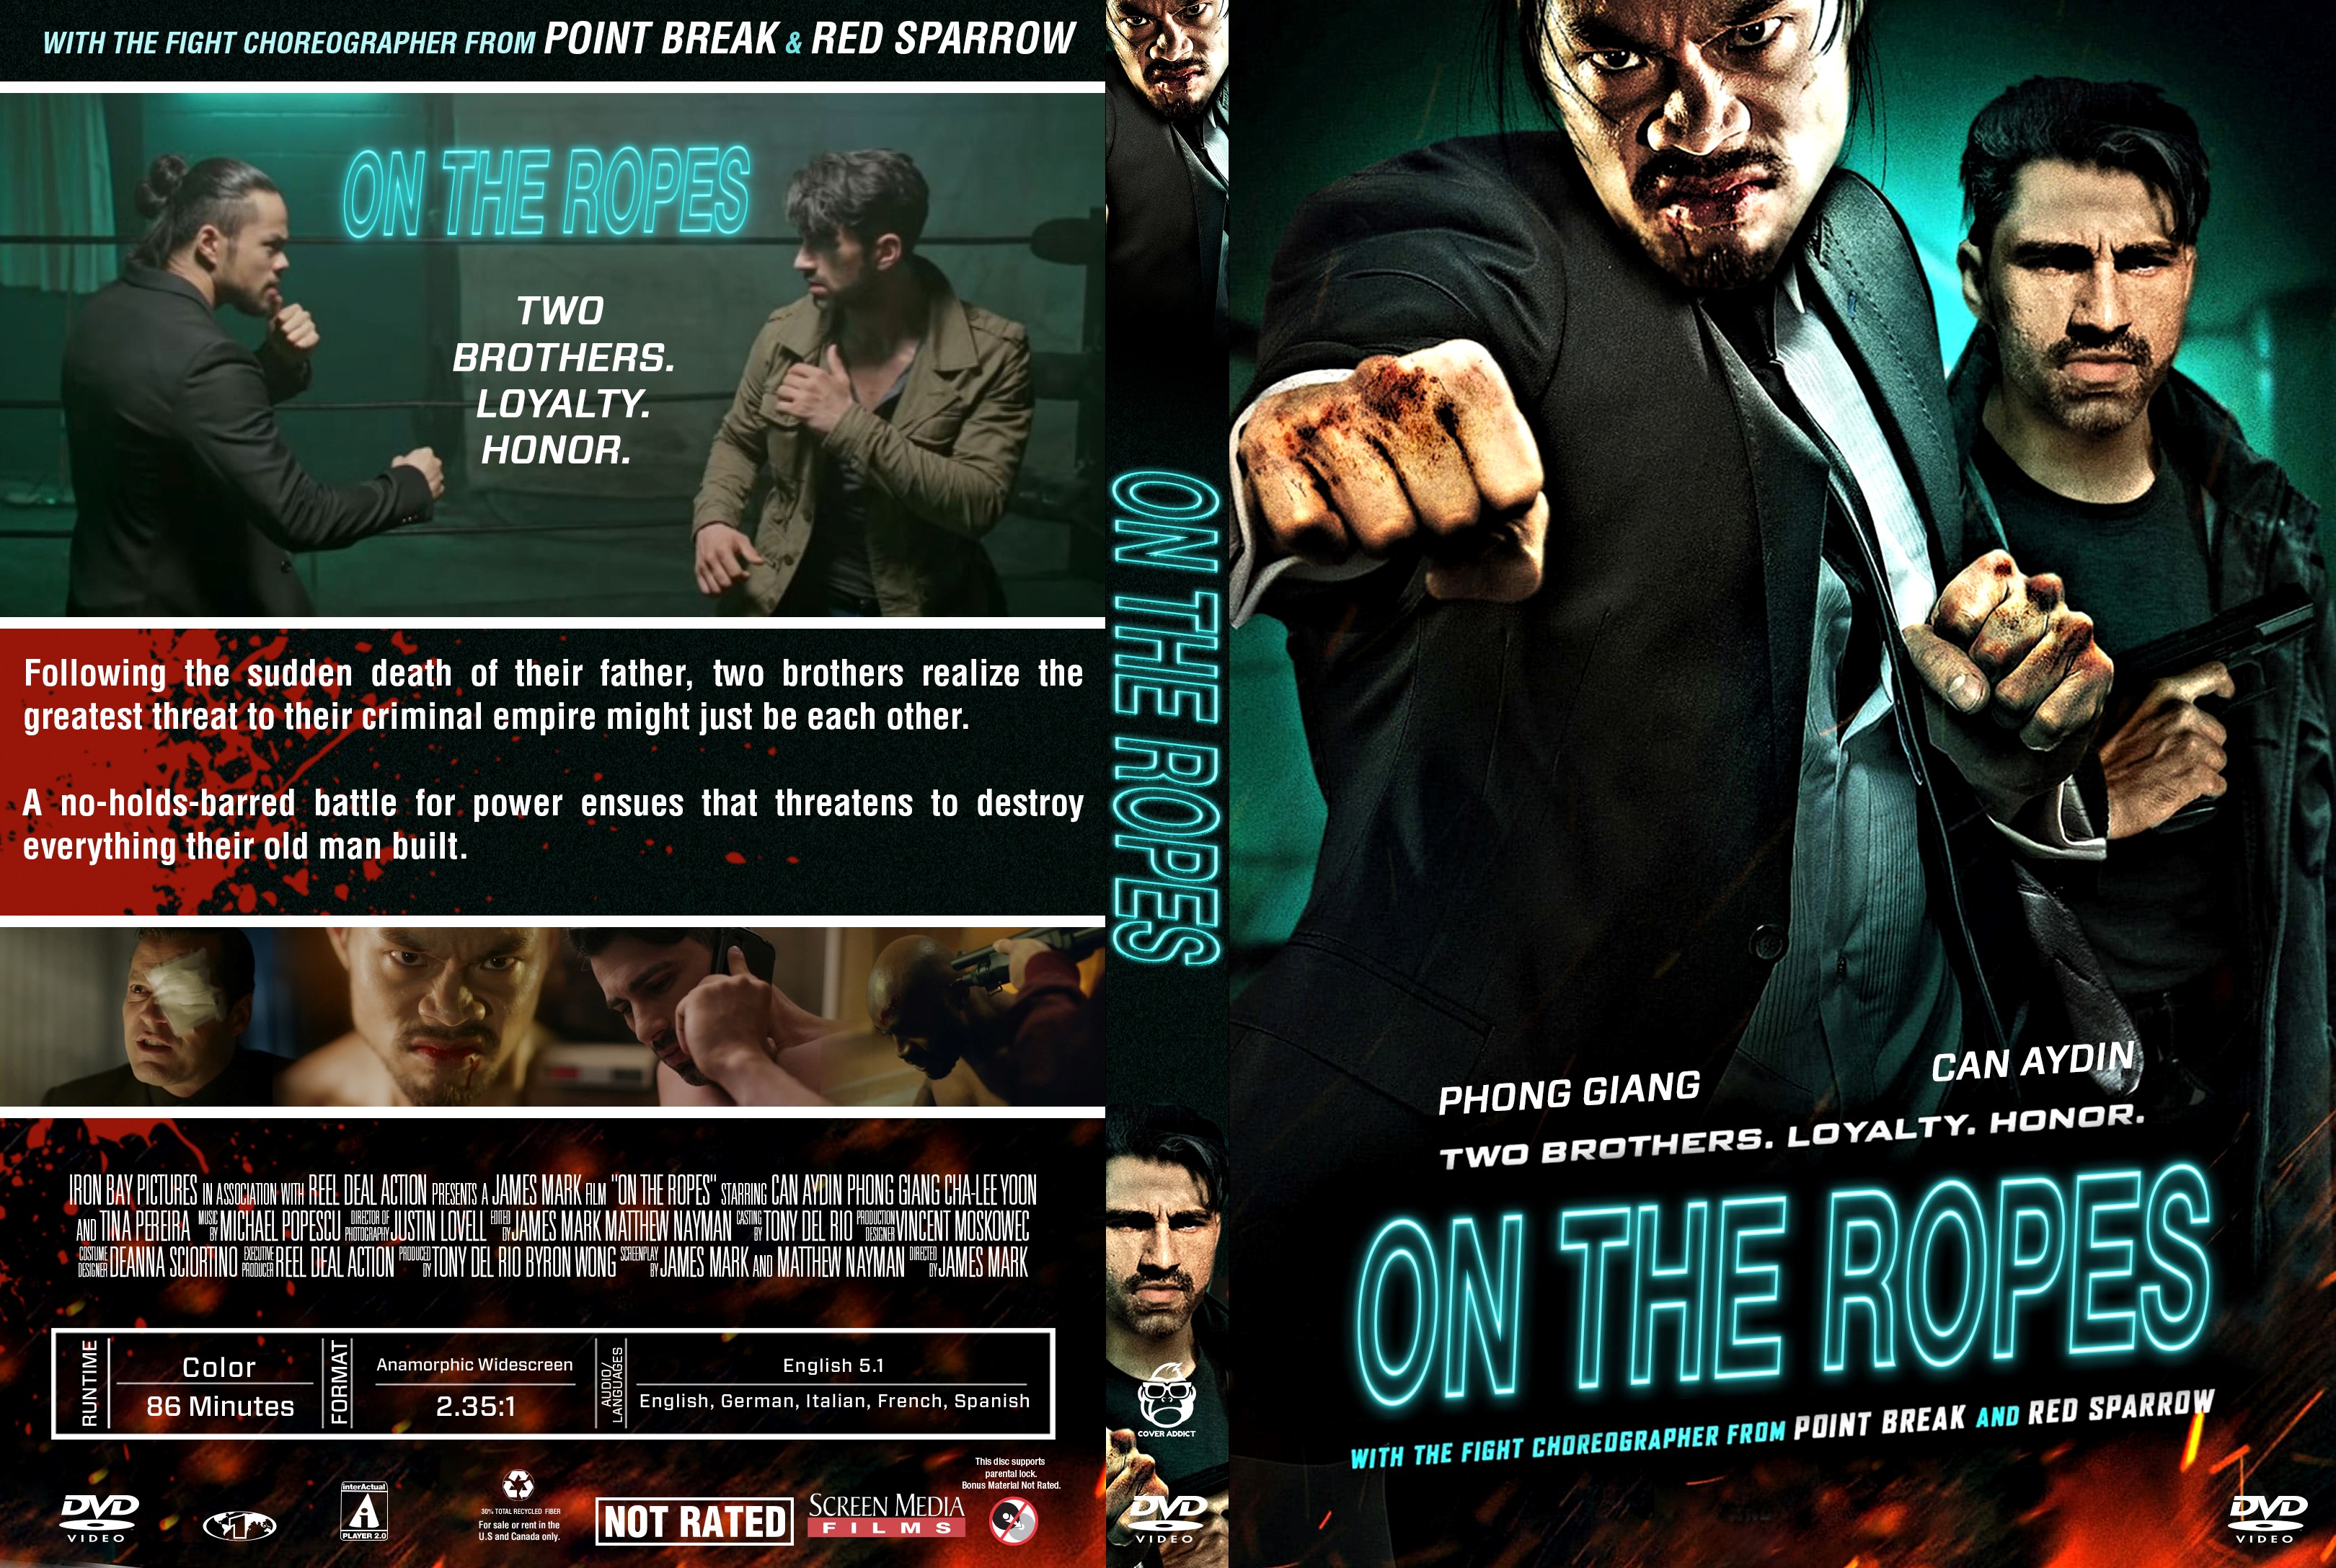 On The Ropes DVD Cover | Cover Addict - Free DVD, Bluray Covers and Movie Posters